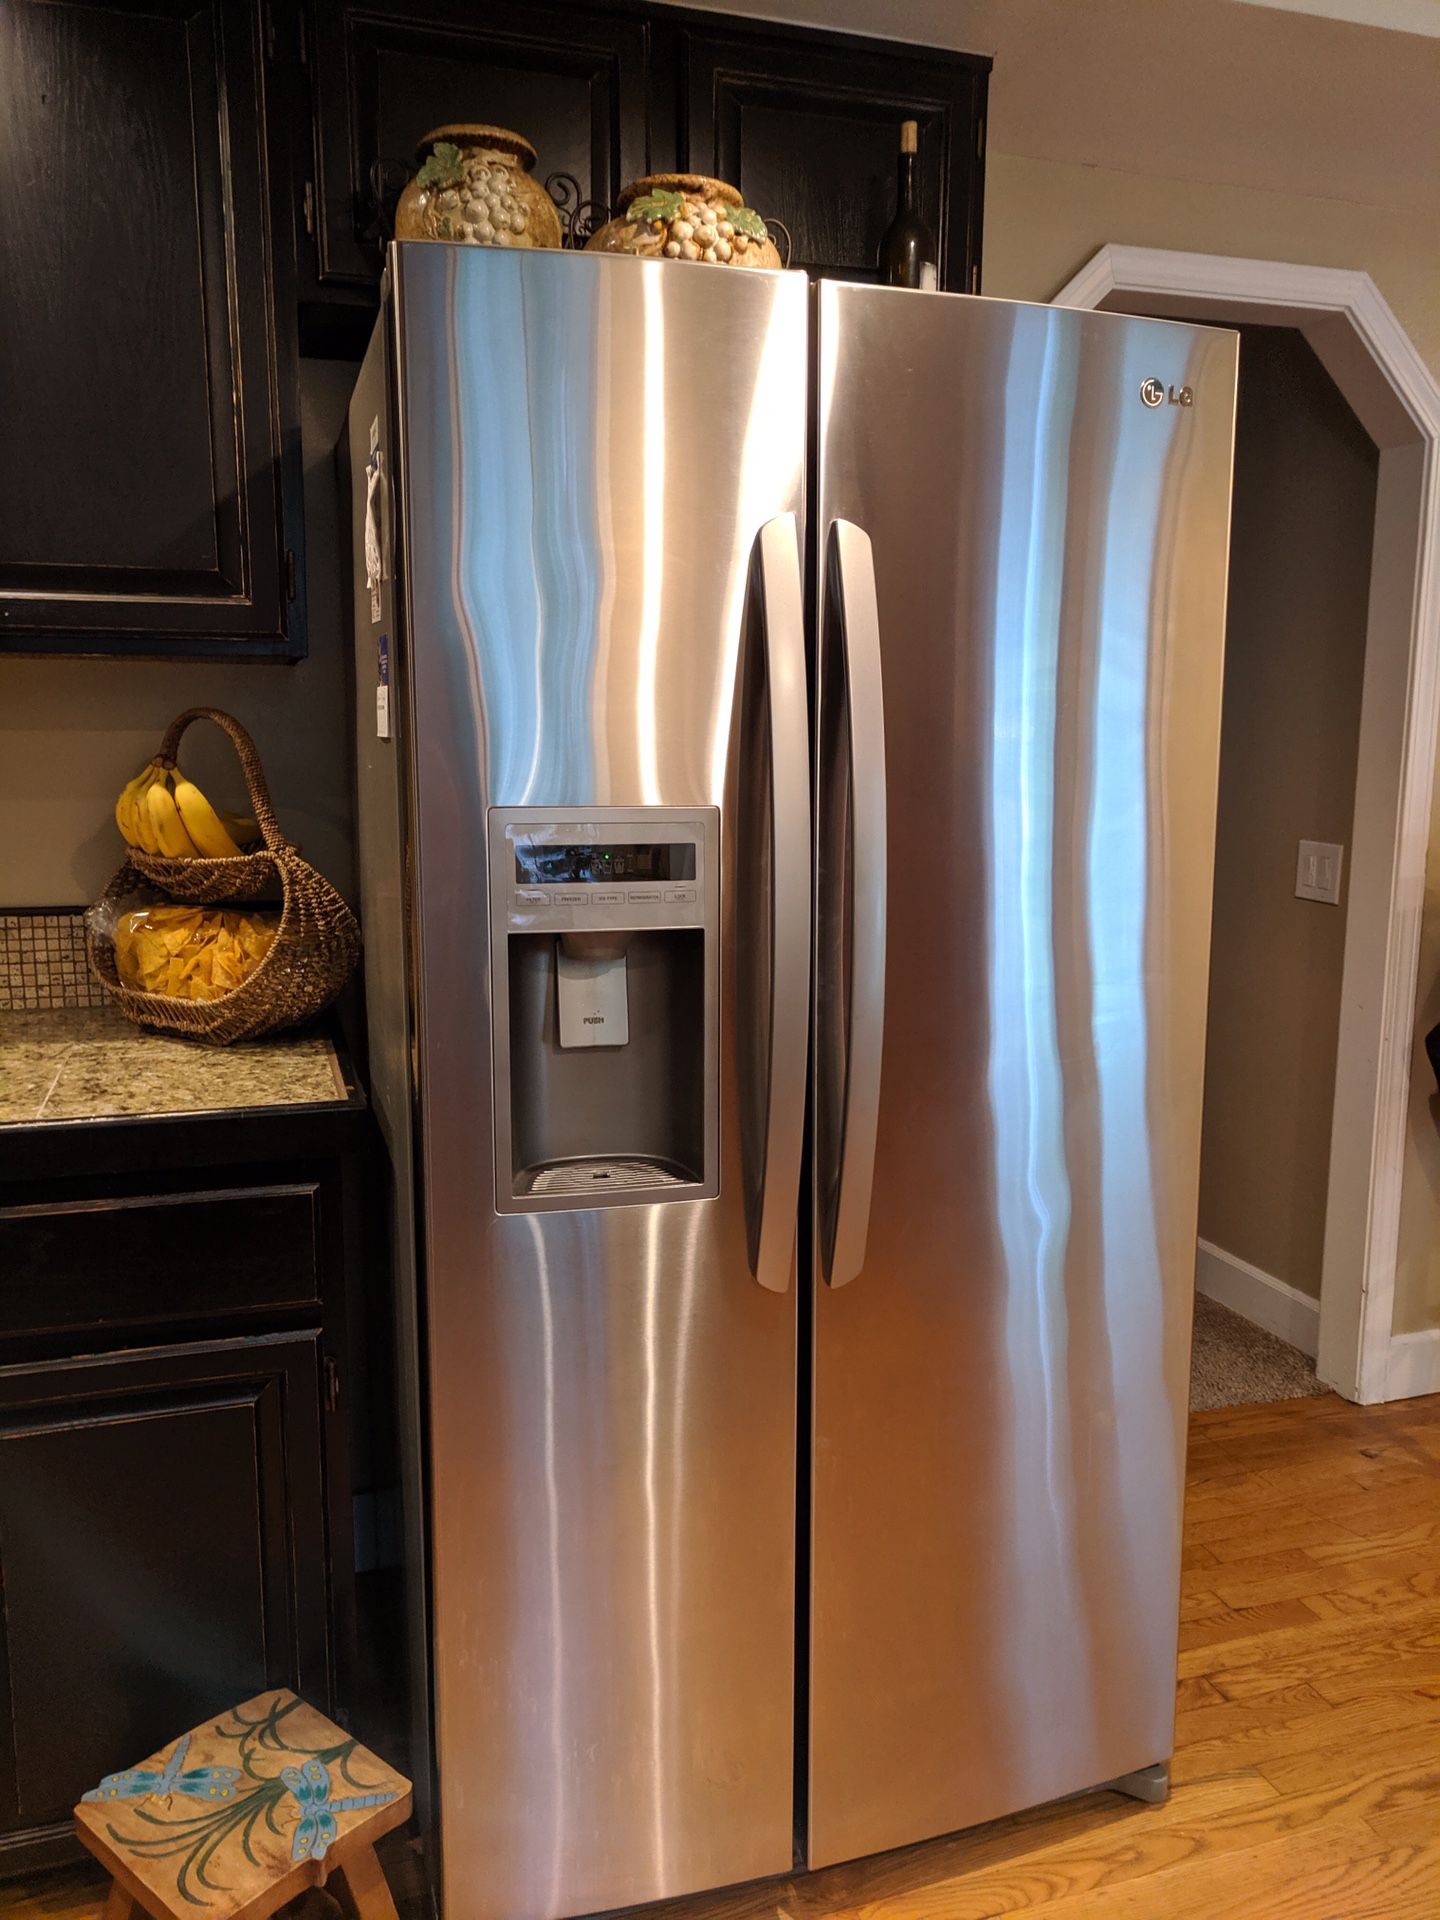 LG Refrigerator Side by Side Water and Ice